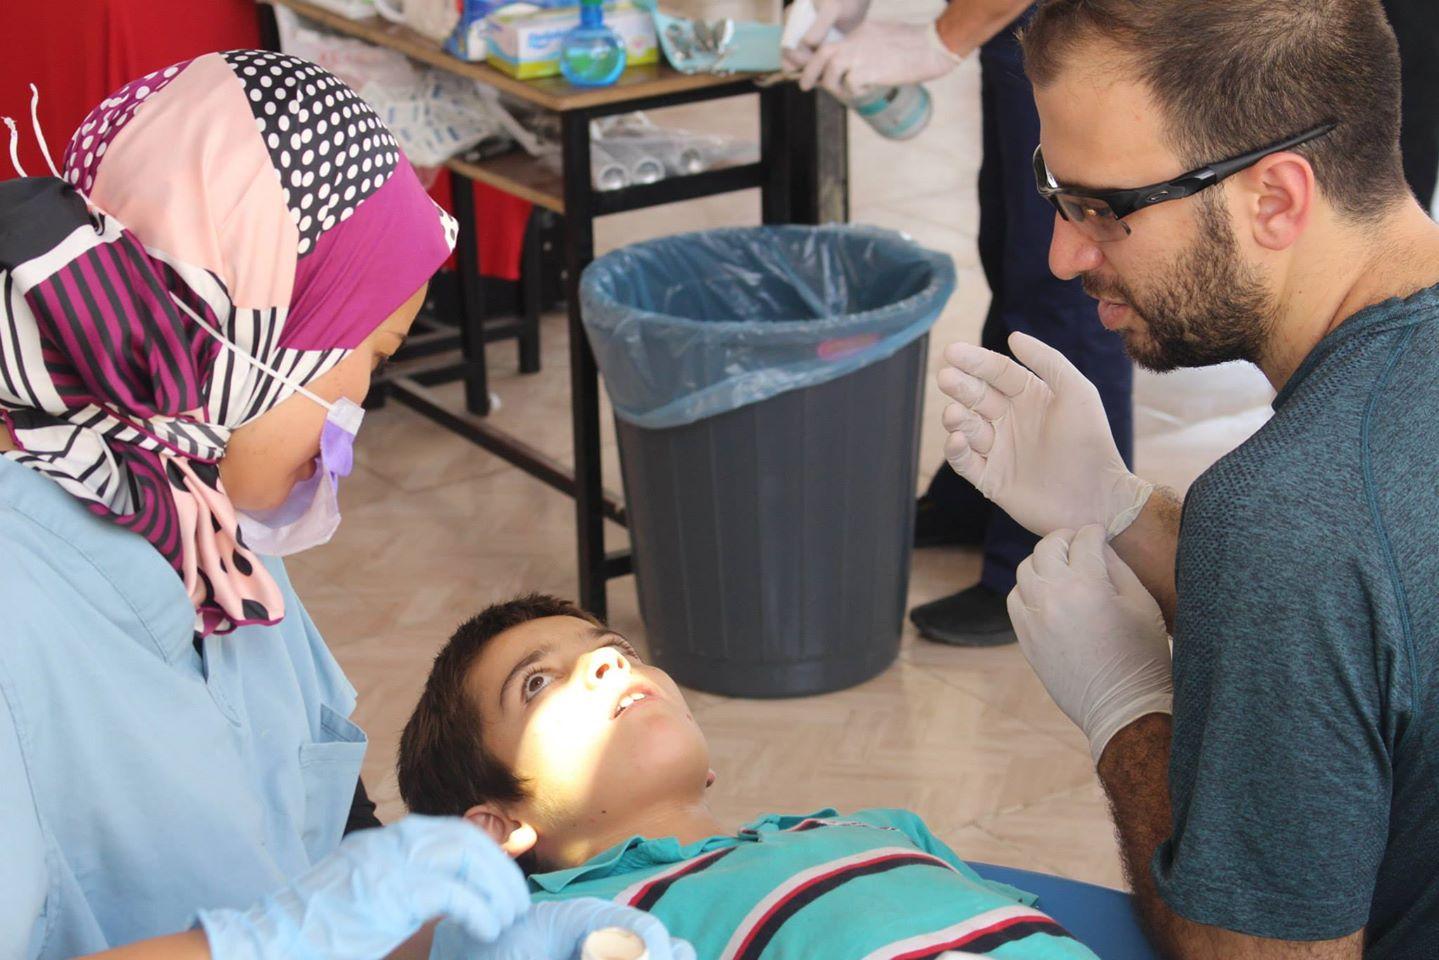 Whether to say "needle" or "sleepy juice": Dr. Sarah Aref and Farris Barakat help a Syrian boy at the temporary Syrian American Medical Society dental clinic on the Turkish-Syrian border.